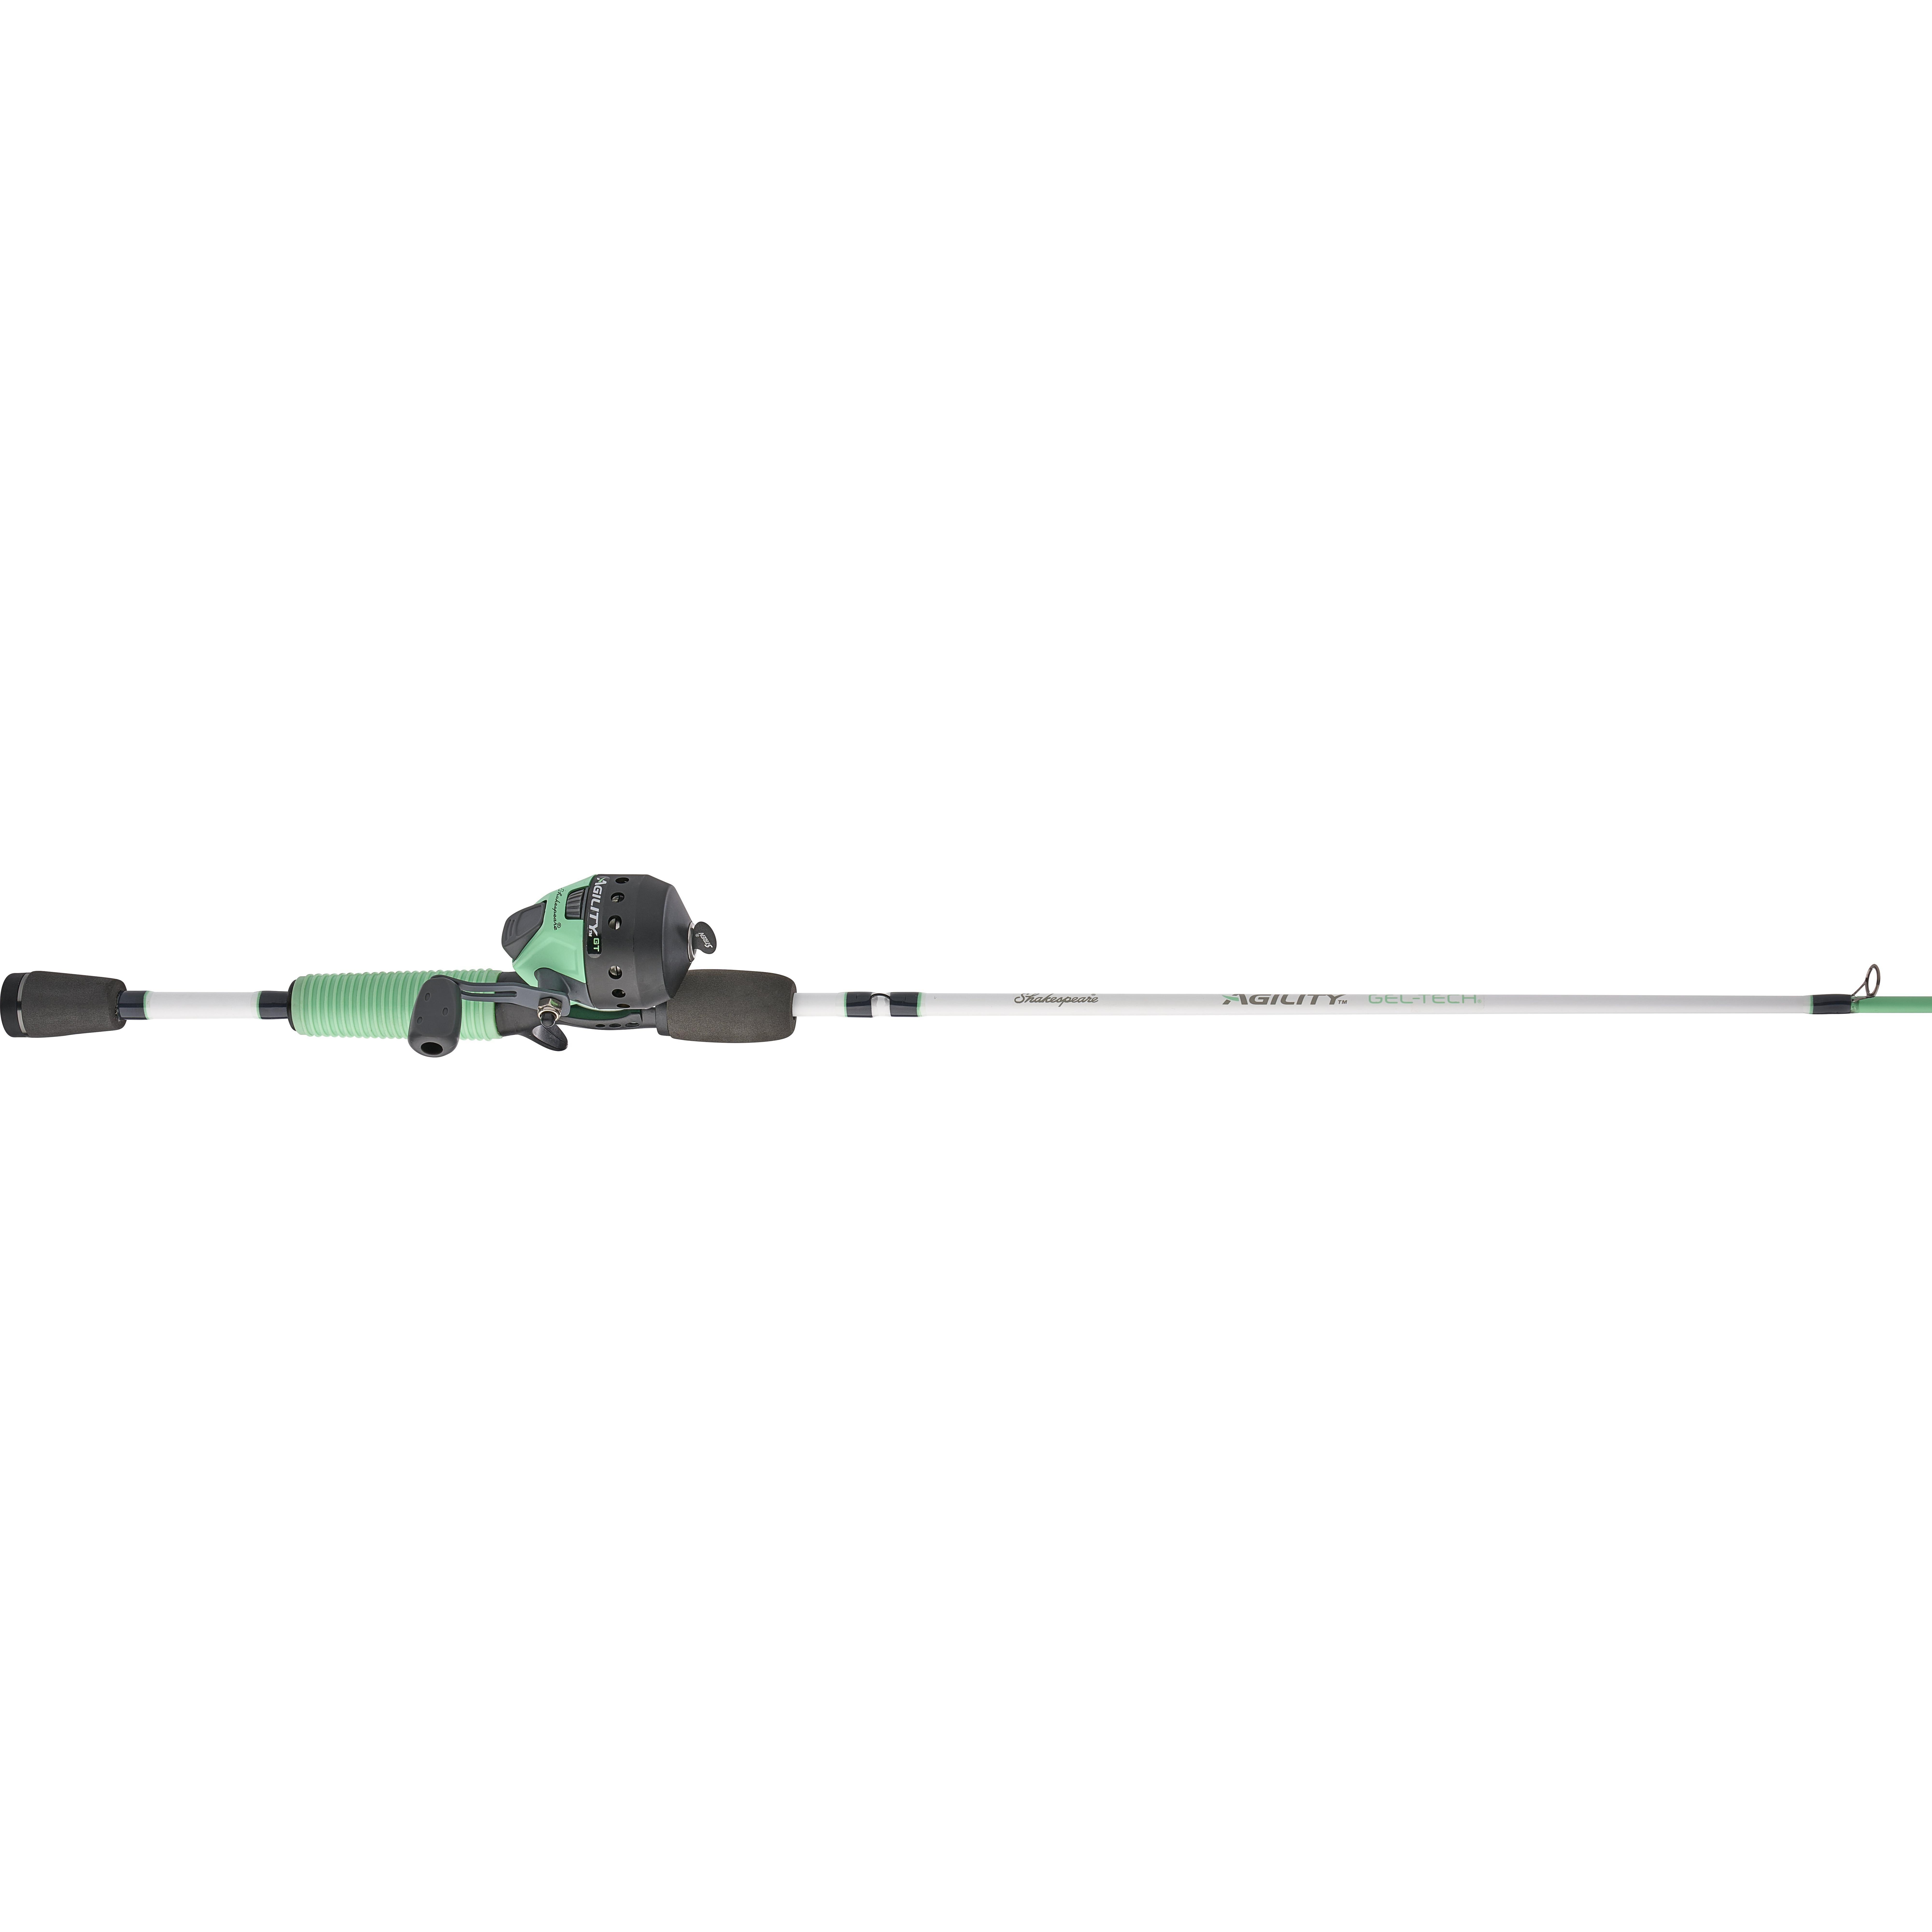 Shakespeare Agility Gel-Tech Spincast Rod & Reel Combo , Up to 19